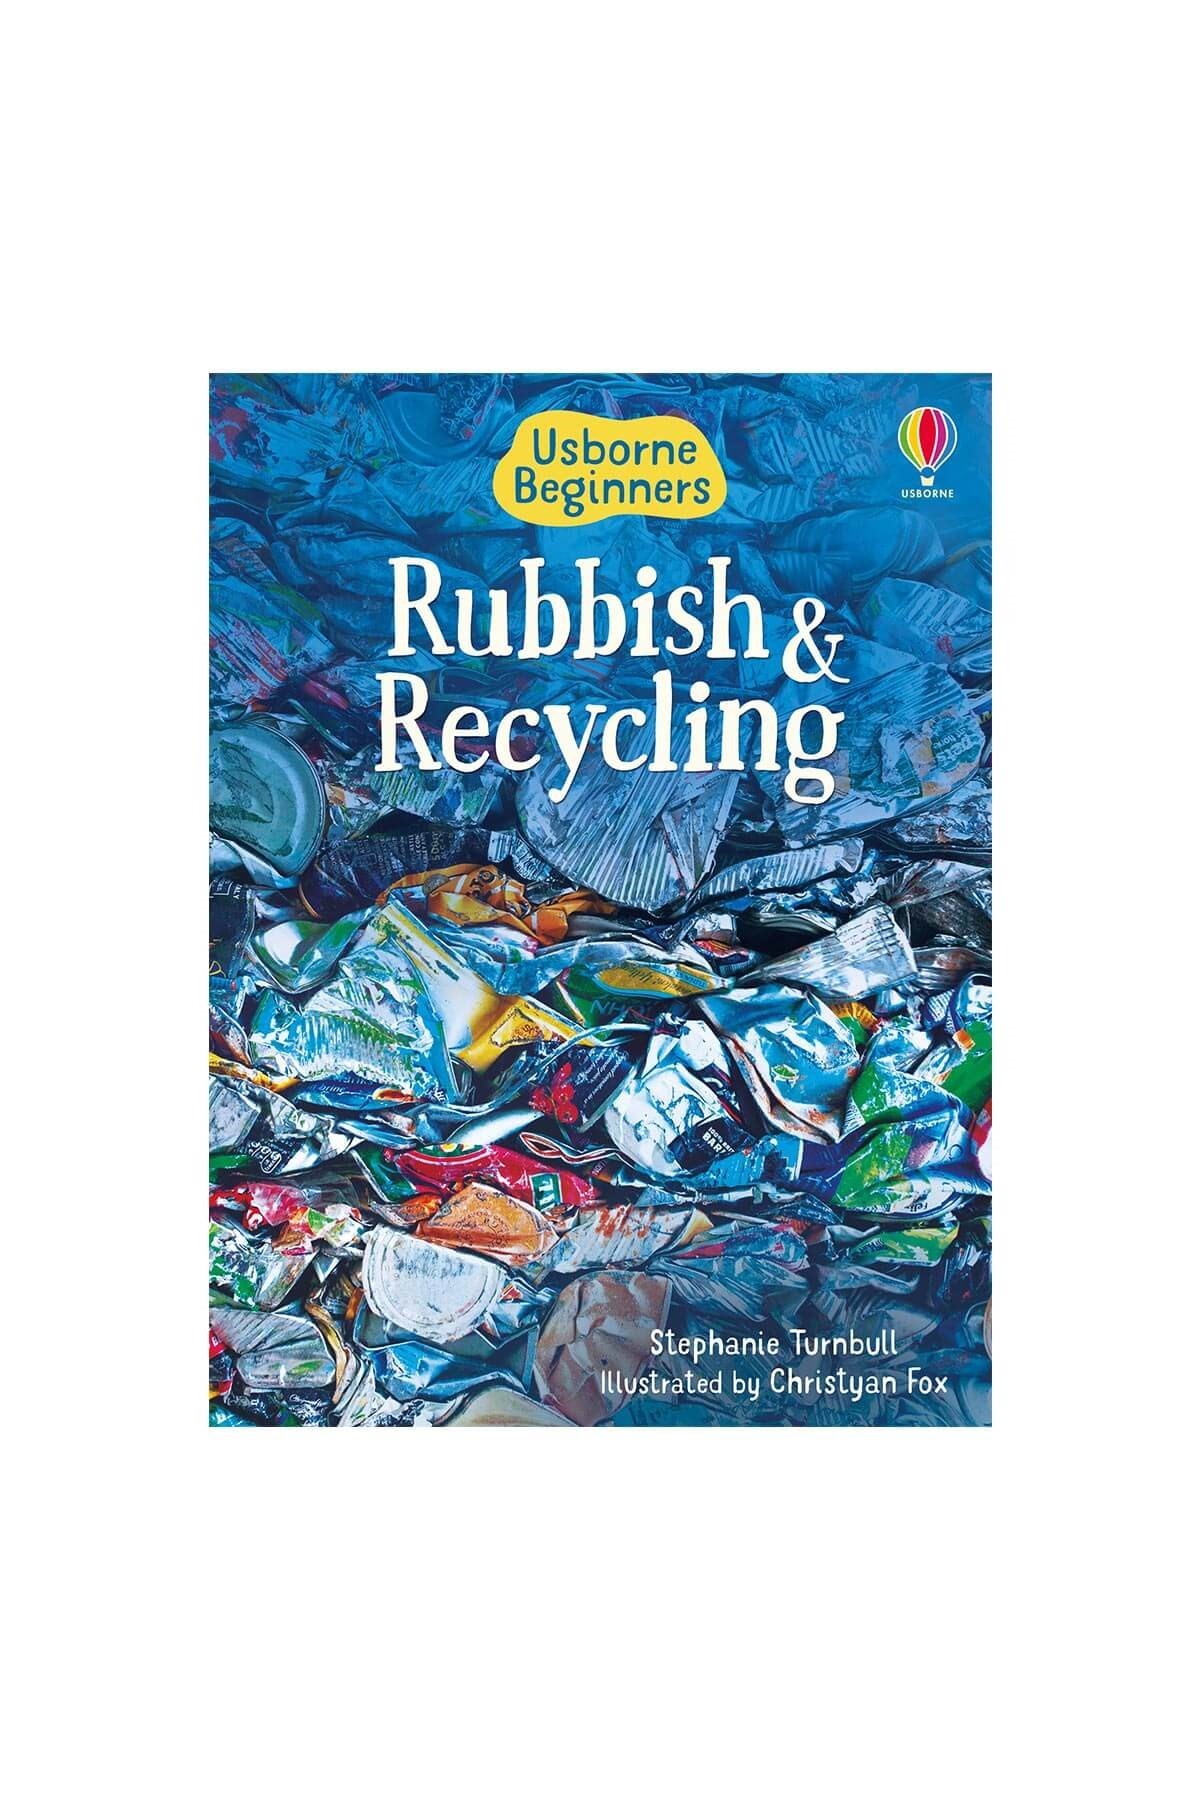 The Usborne Beginners Rubbish & Recycling